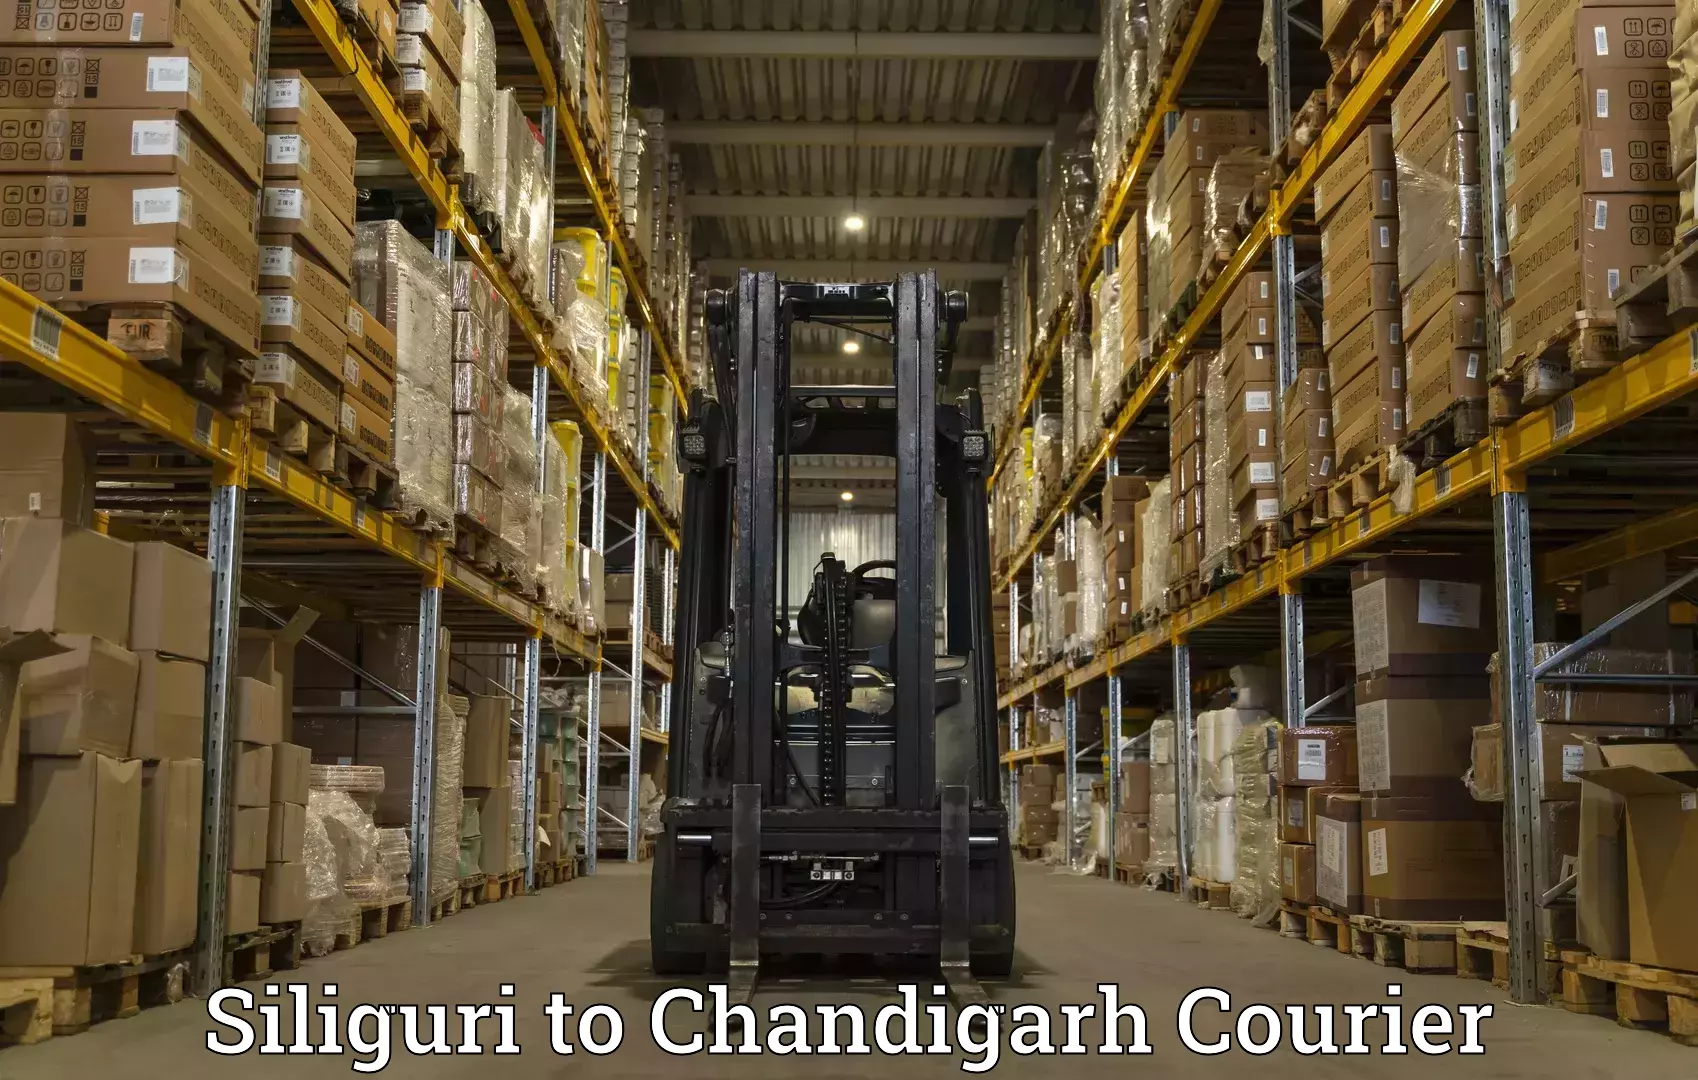 Subscription-based courier Siliguri to Chandigarh